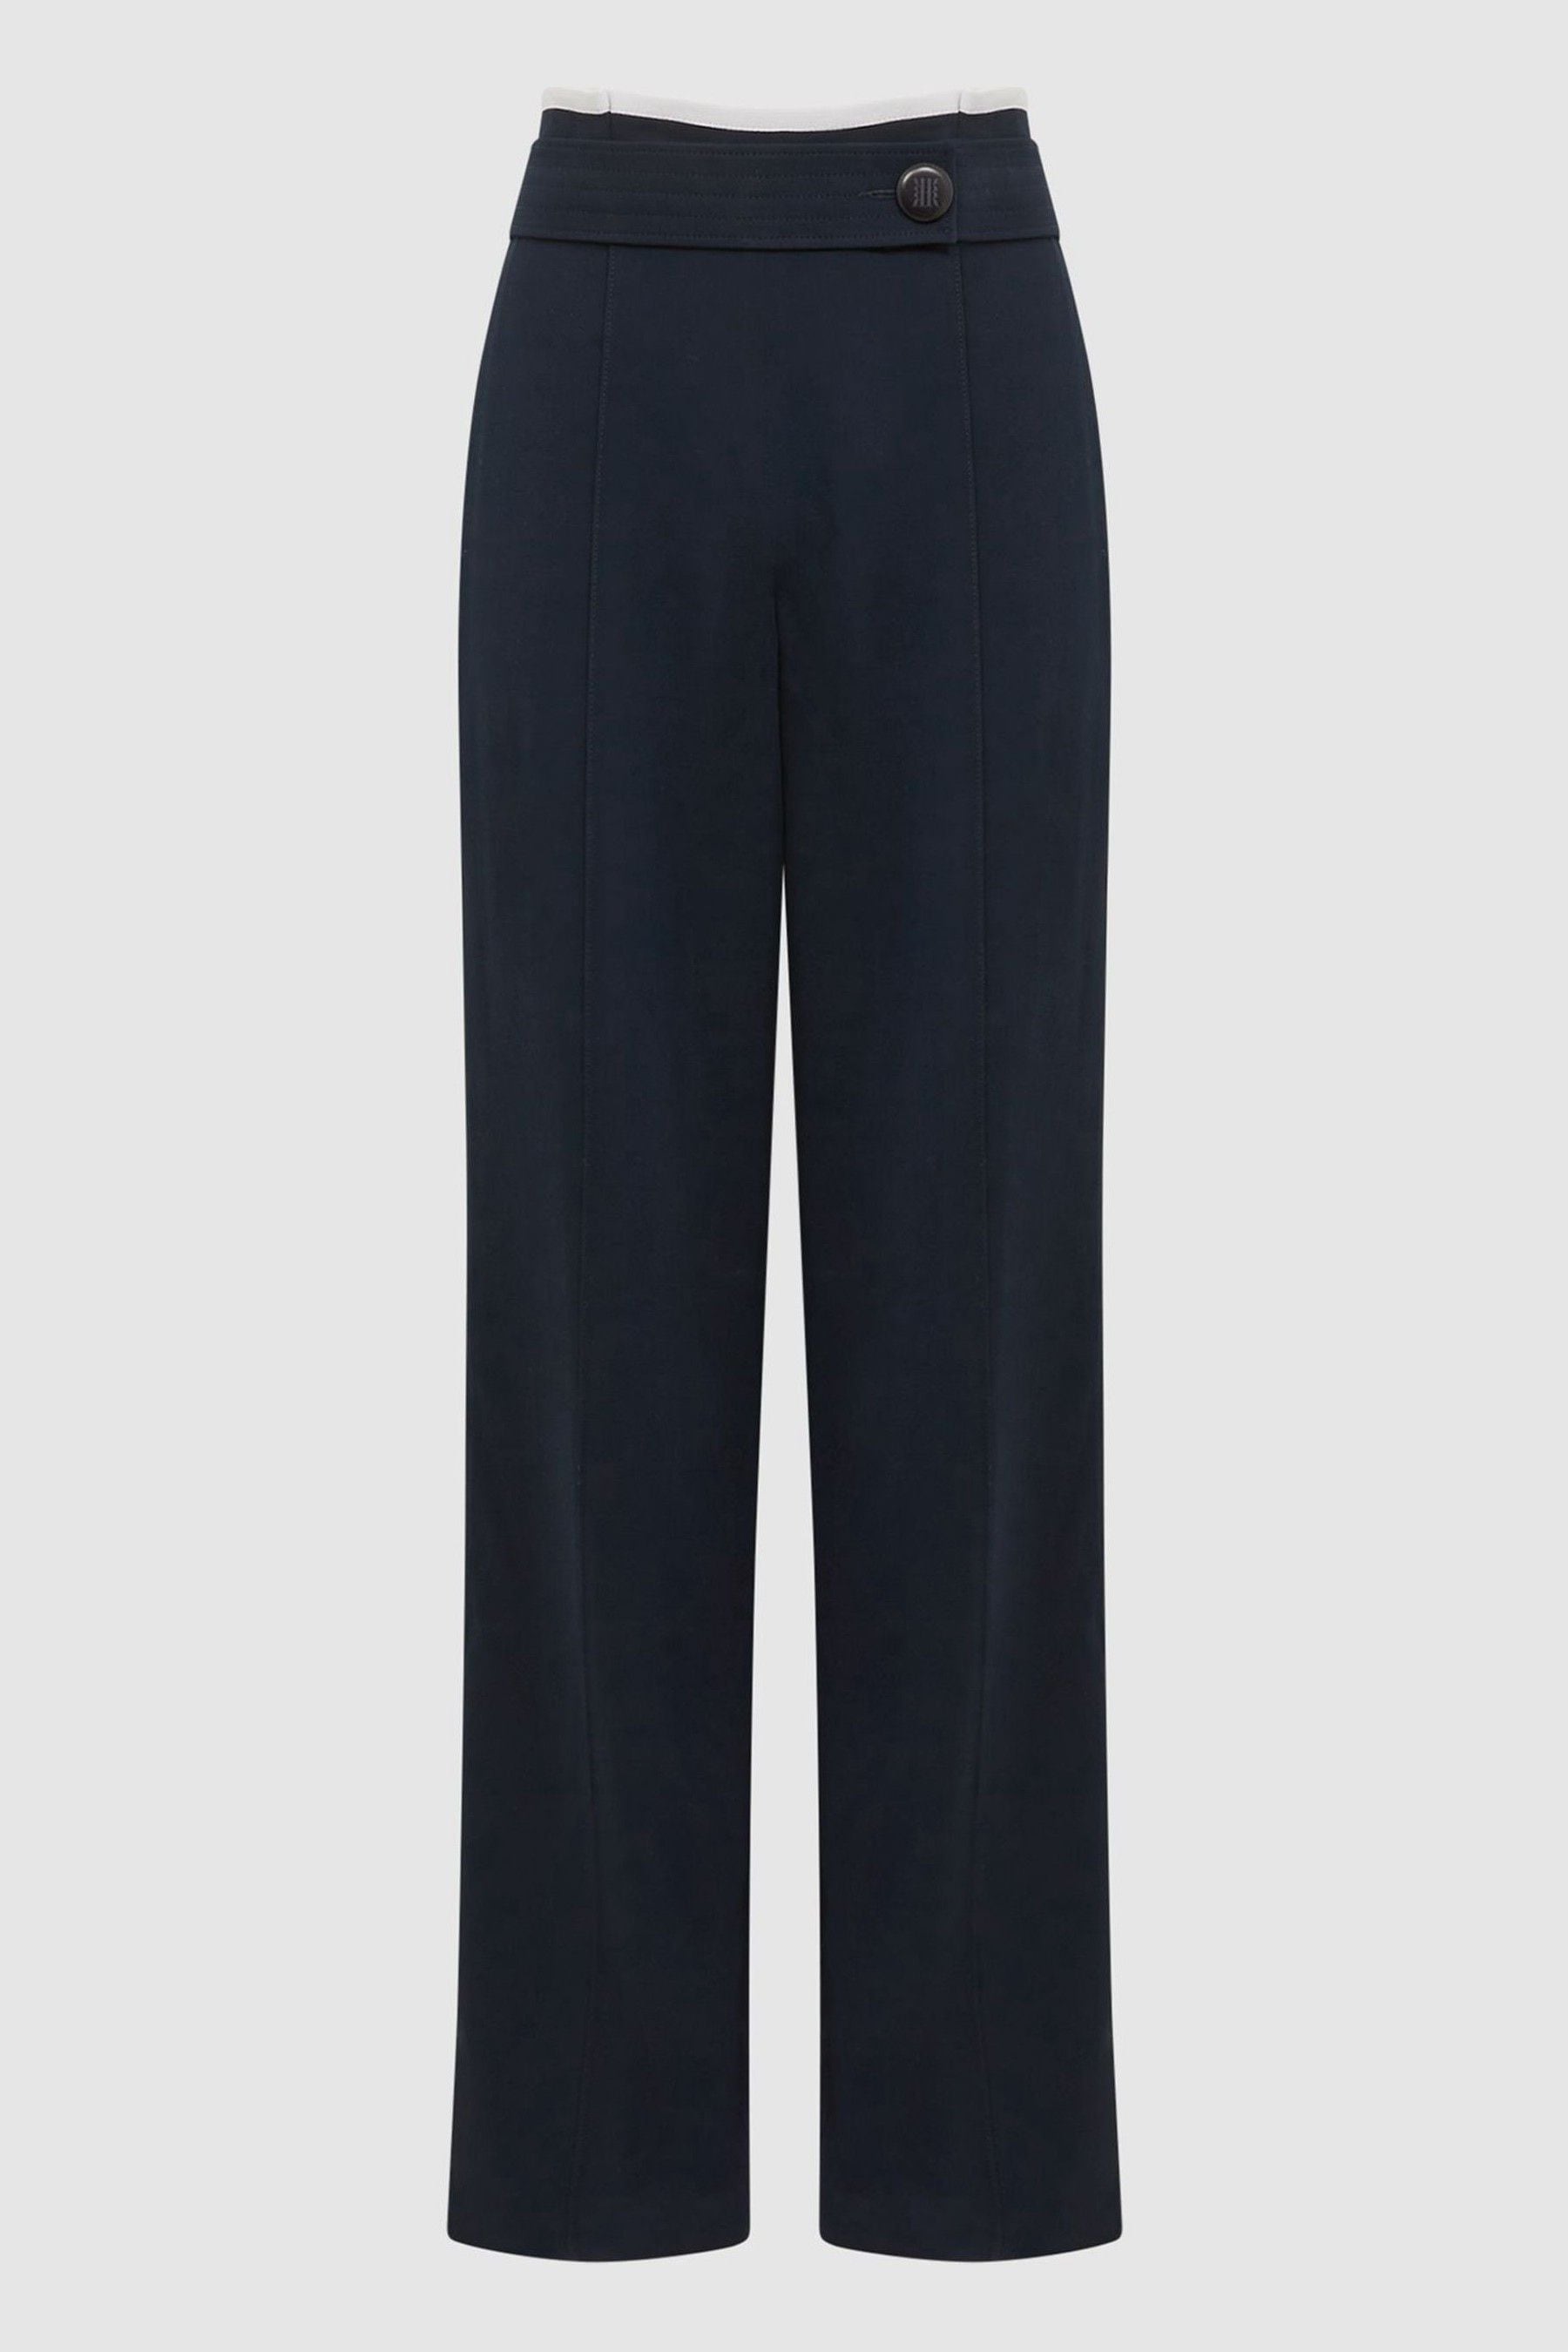 Buy Reiss Navy Lina Petite High Rise Wide Leg Trousers from the Next UK ...